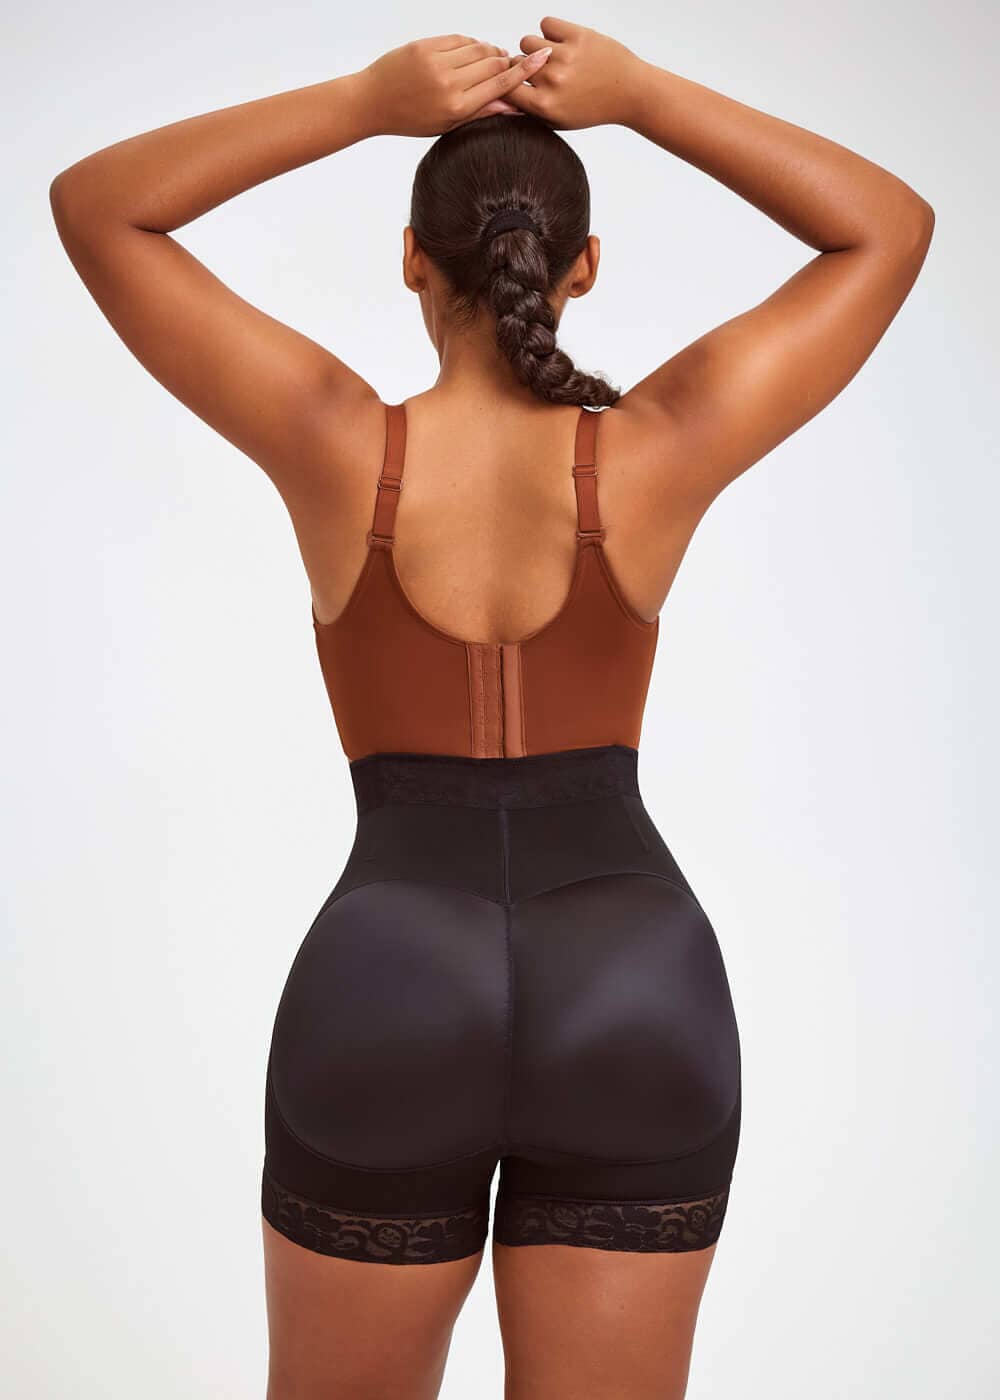 Booty Boosting Body Suit - Brief